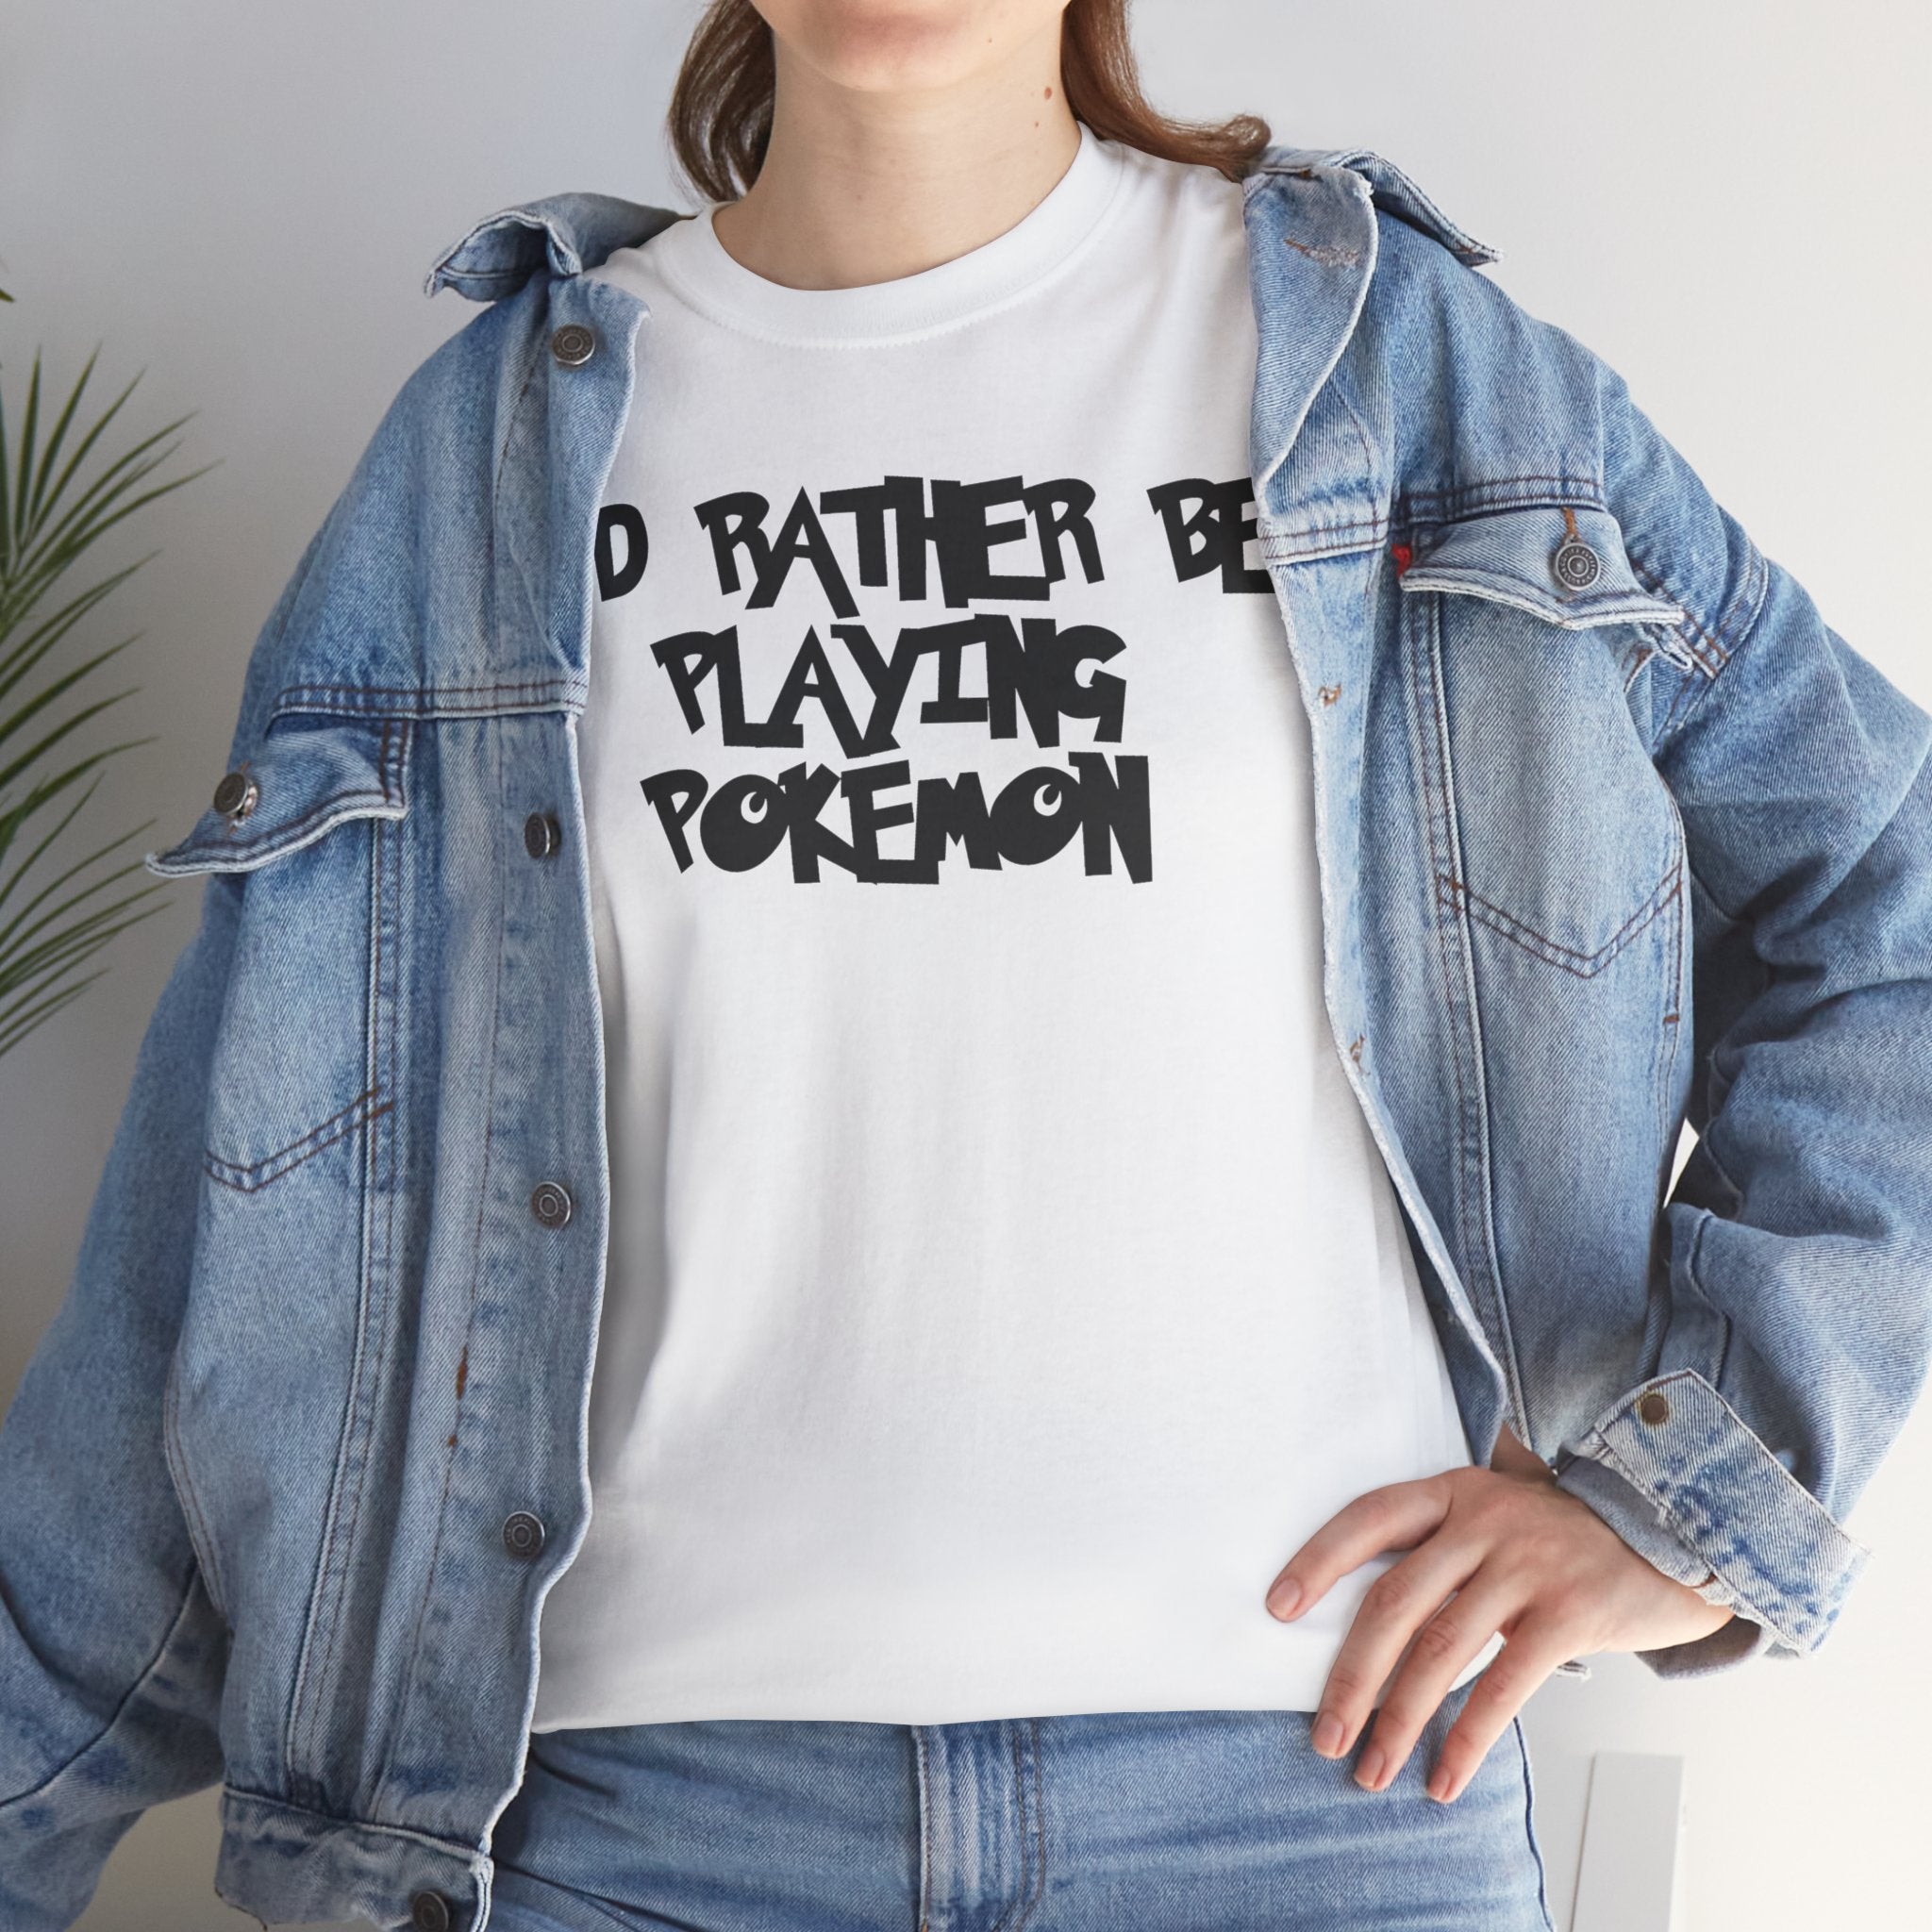 Poke mon I'd Rather Be Playing Unisex Heavy Cotton Tee Gamer Shirt Tshirt T-shirt Gamer Gift For Him Her Game Cup Cups Mugs Birthday Christmas Valentine's Anniversary Gifts